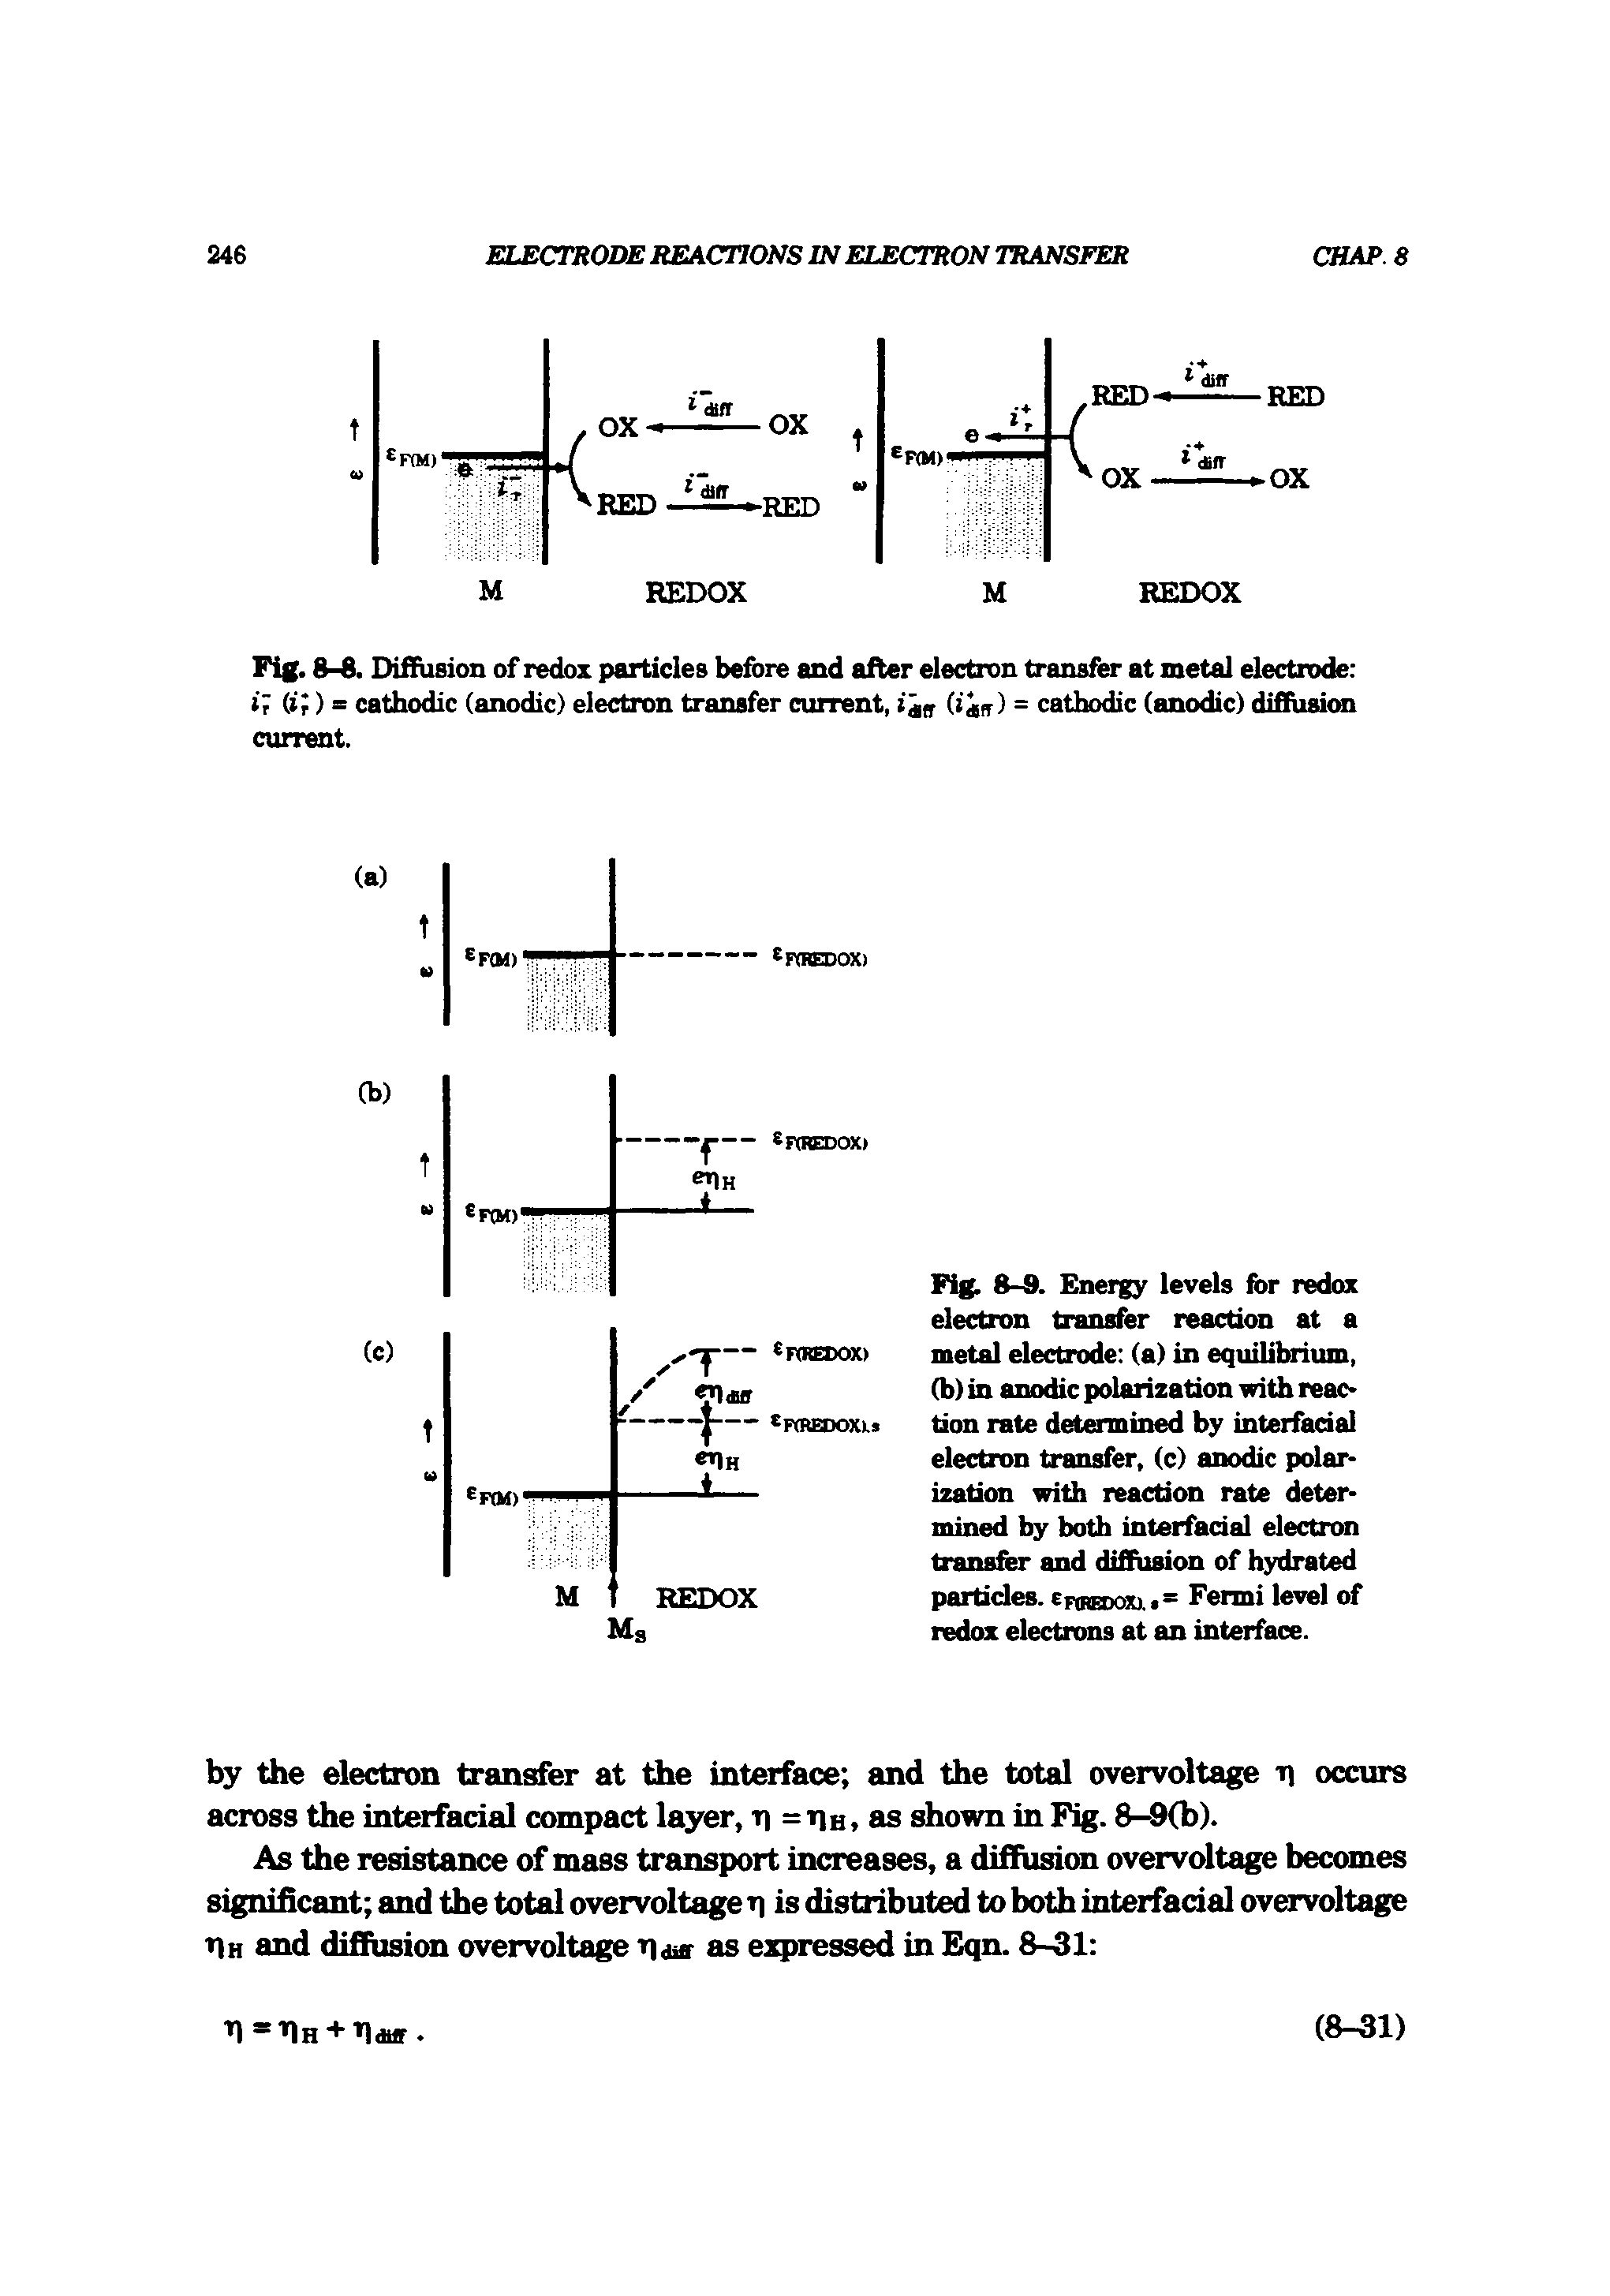 Fig. 8-8. Energy levels for redox electron transfer reaction at a metal electrode (a) in equilibrium, (b) in anodic polarization with reao tion rate determined by interfadal electron transfer, (c) anodic polarization with reaction rate determined by both interfadal electron transfer and diffusion of hydrated partides. EF0)Eooxj.a= Fenni level of redox electrons at an interface.